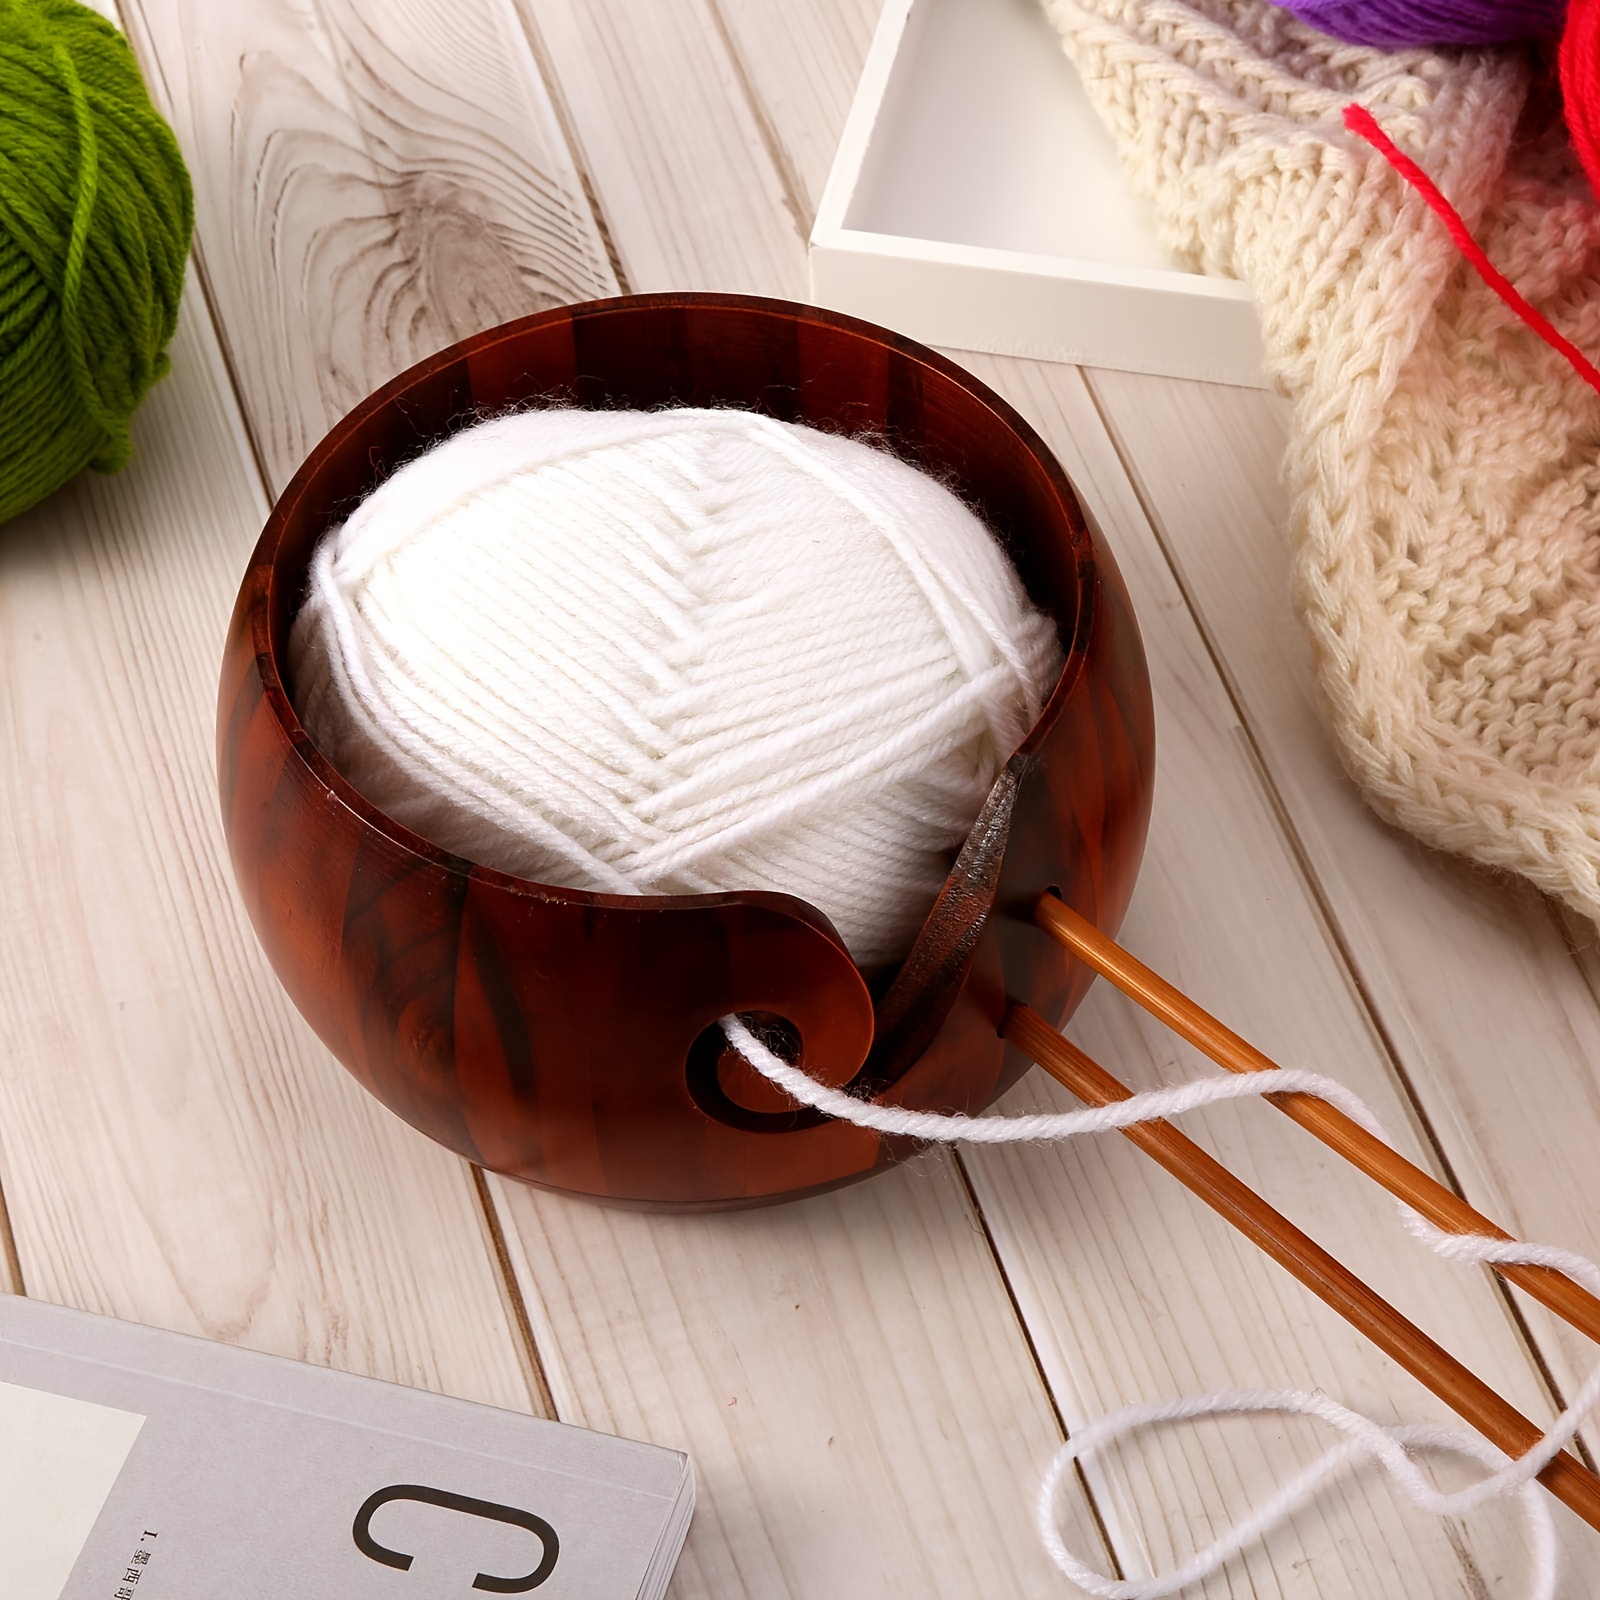 tchrules Wooden Yarn Bowl for Crocheting, Crochet Bowl with Holes Tangles  Free, Yarn Ball Holder for Knitting Craft, Handmade Yarn Bowl Organizer